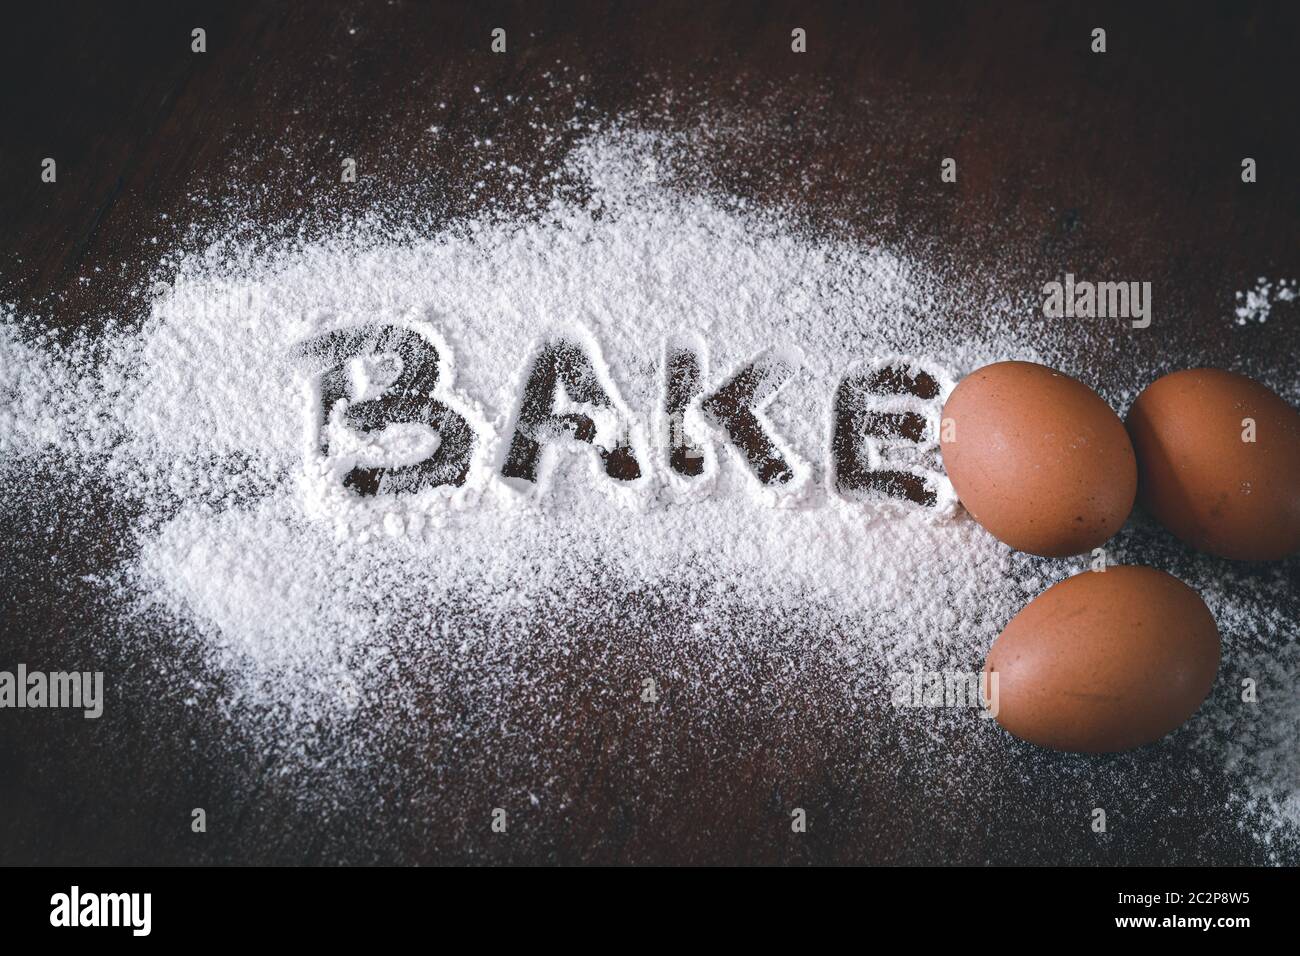 Conceptual still life photo of eggs and flour spilled on a table to show concept of baking as a way to support mental health and coping during home qu Stock Photo